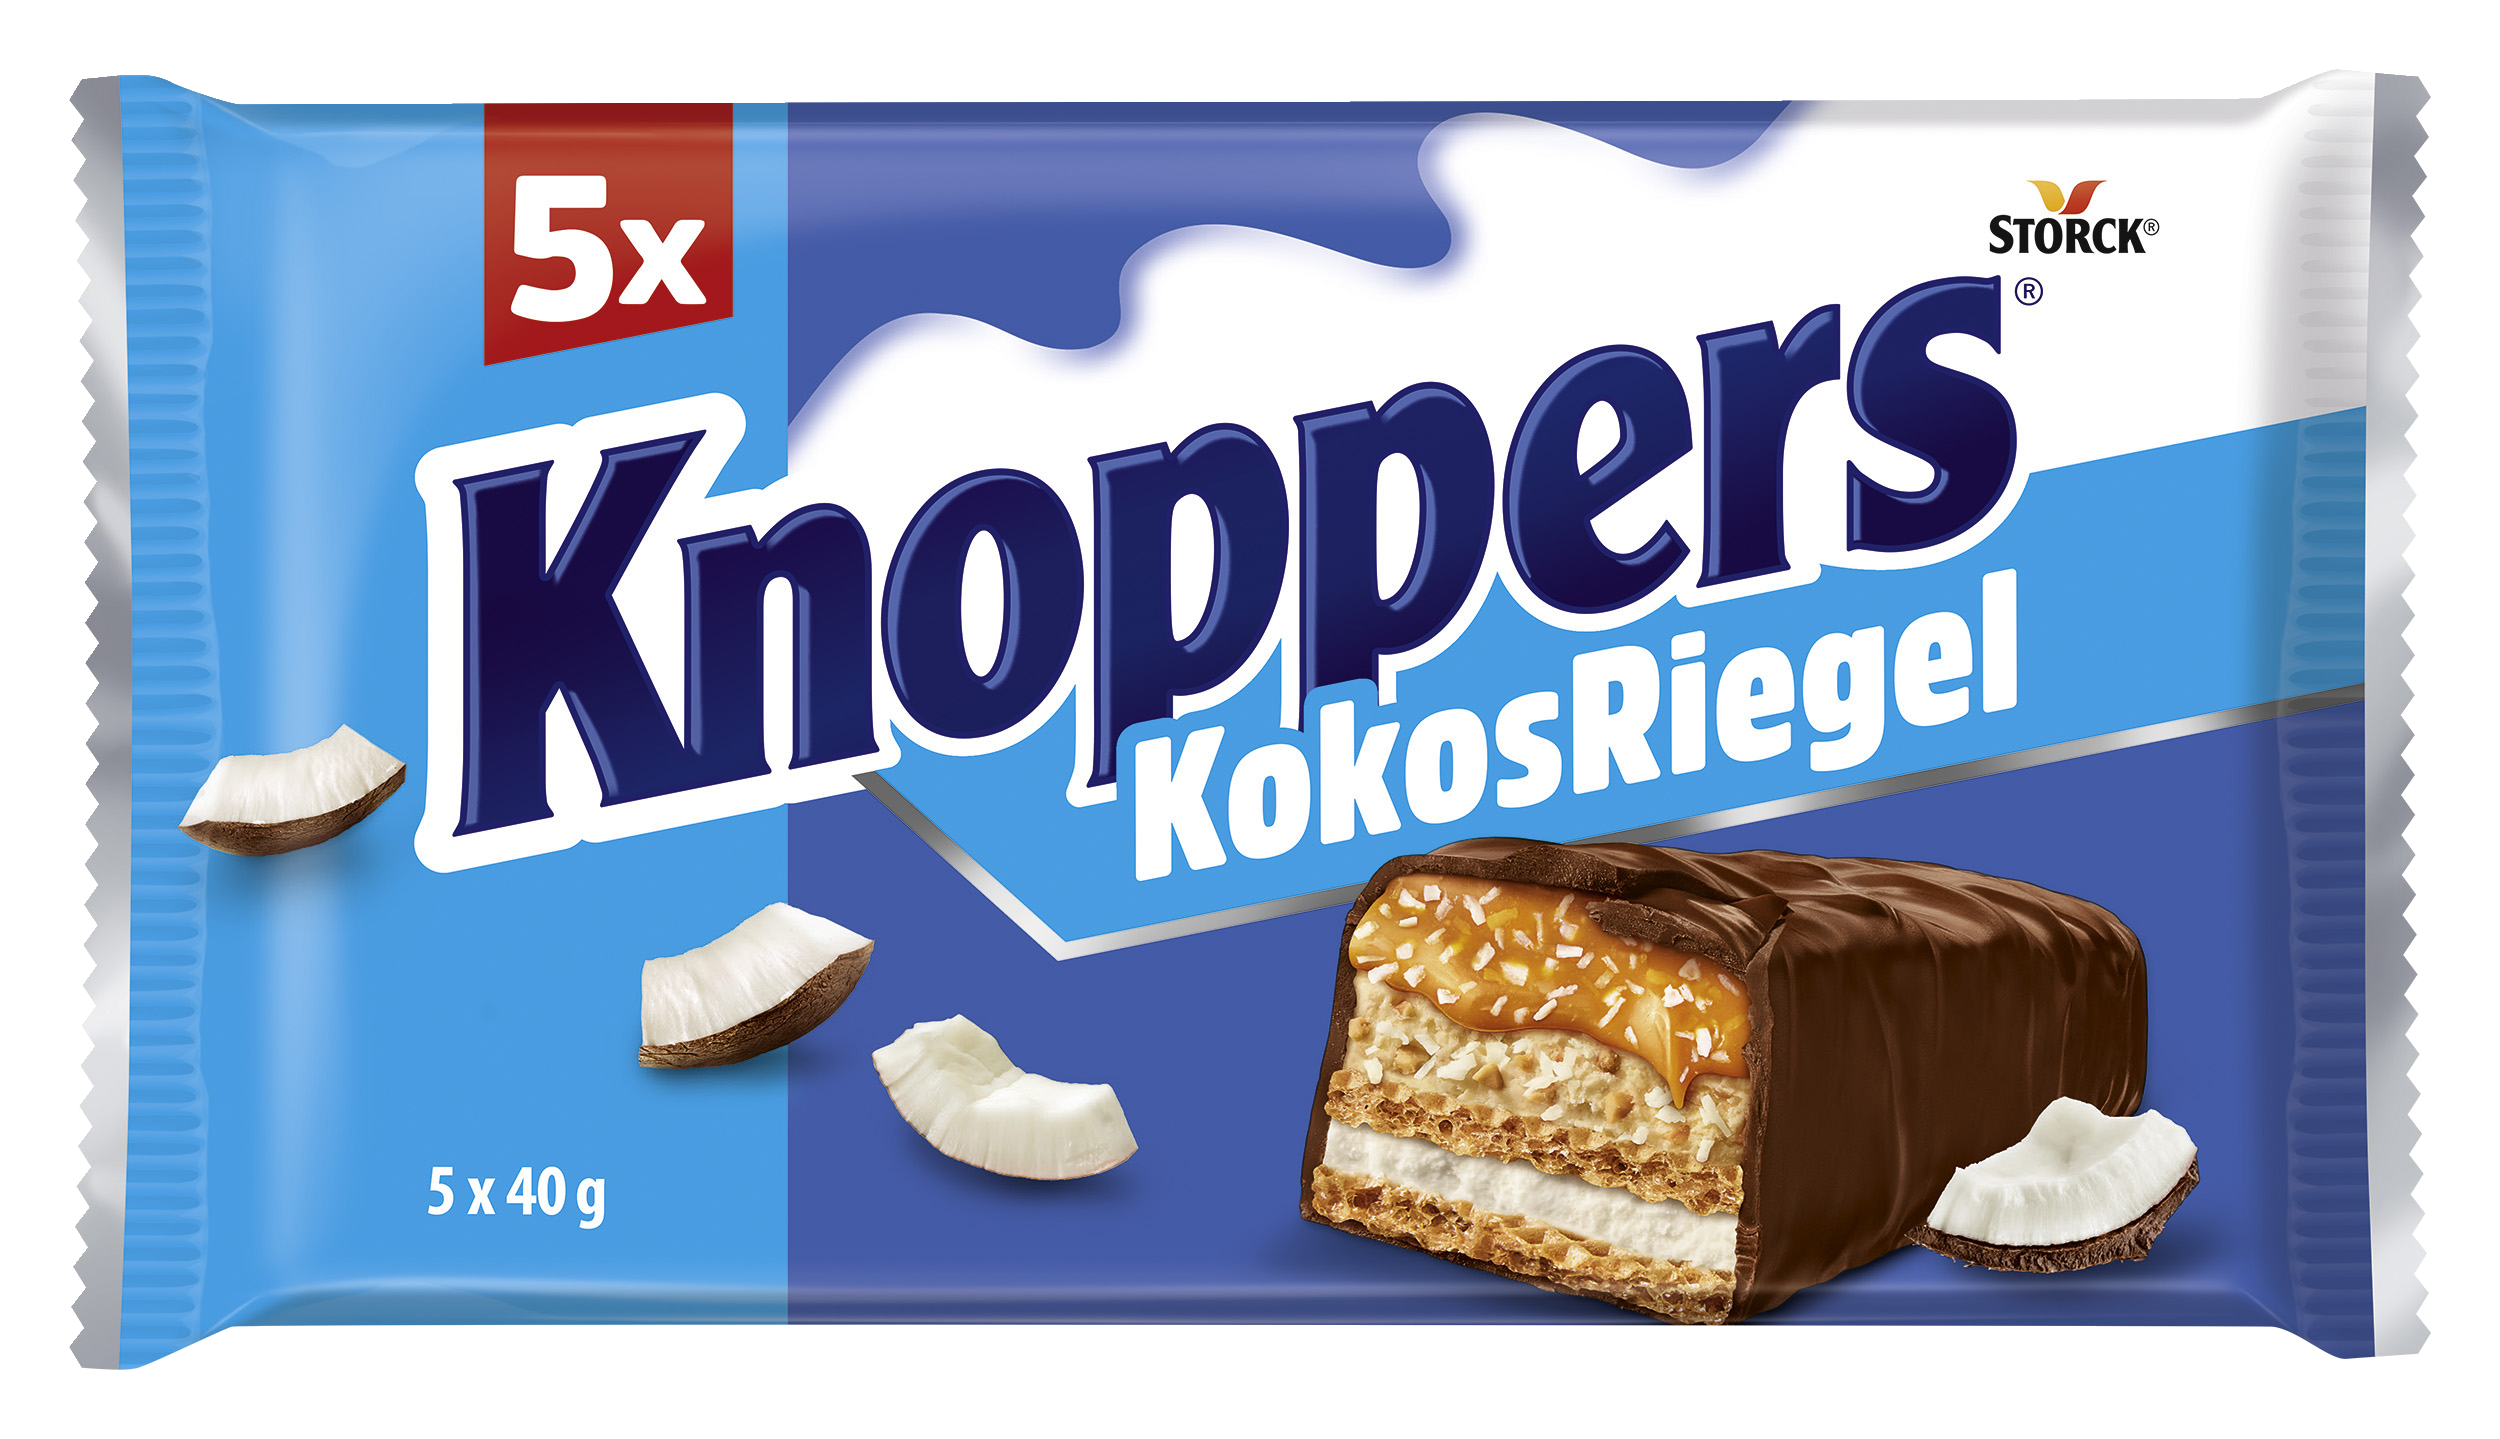 Knoppers Riegel